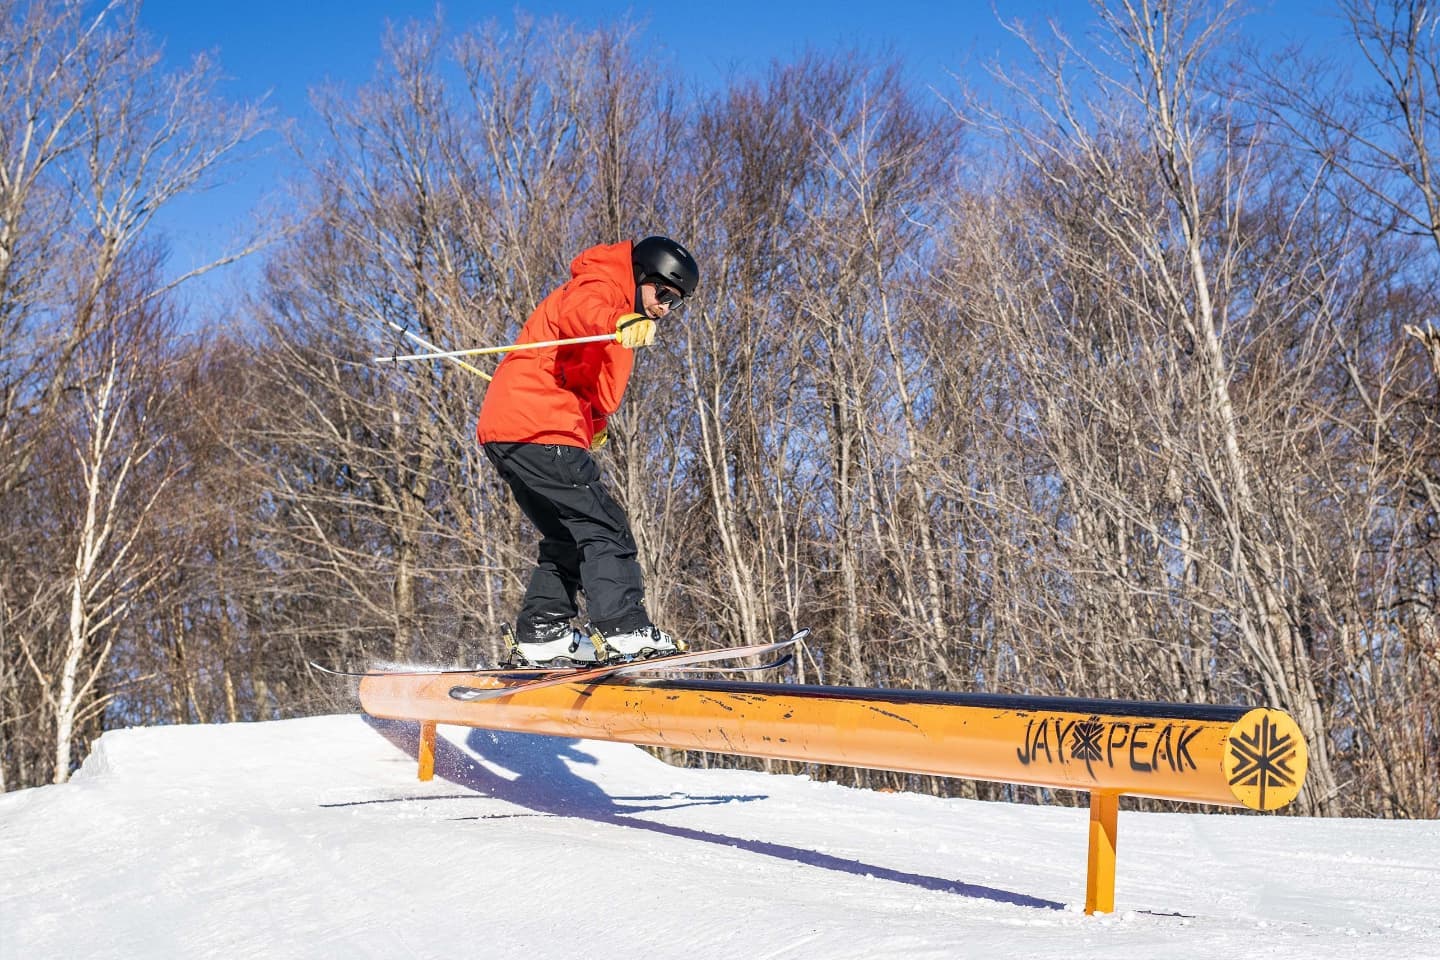 Person skiing on a rail at one of Jay Peak Resort's terrain parks.